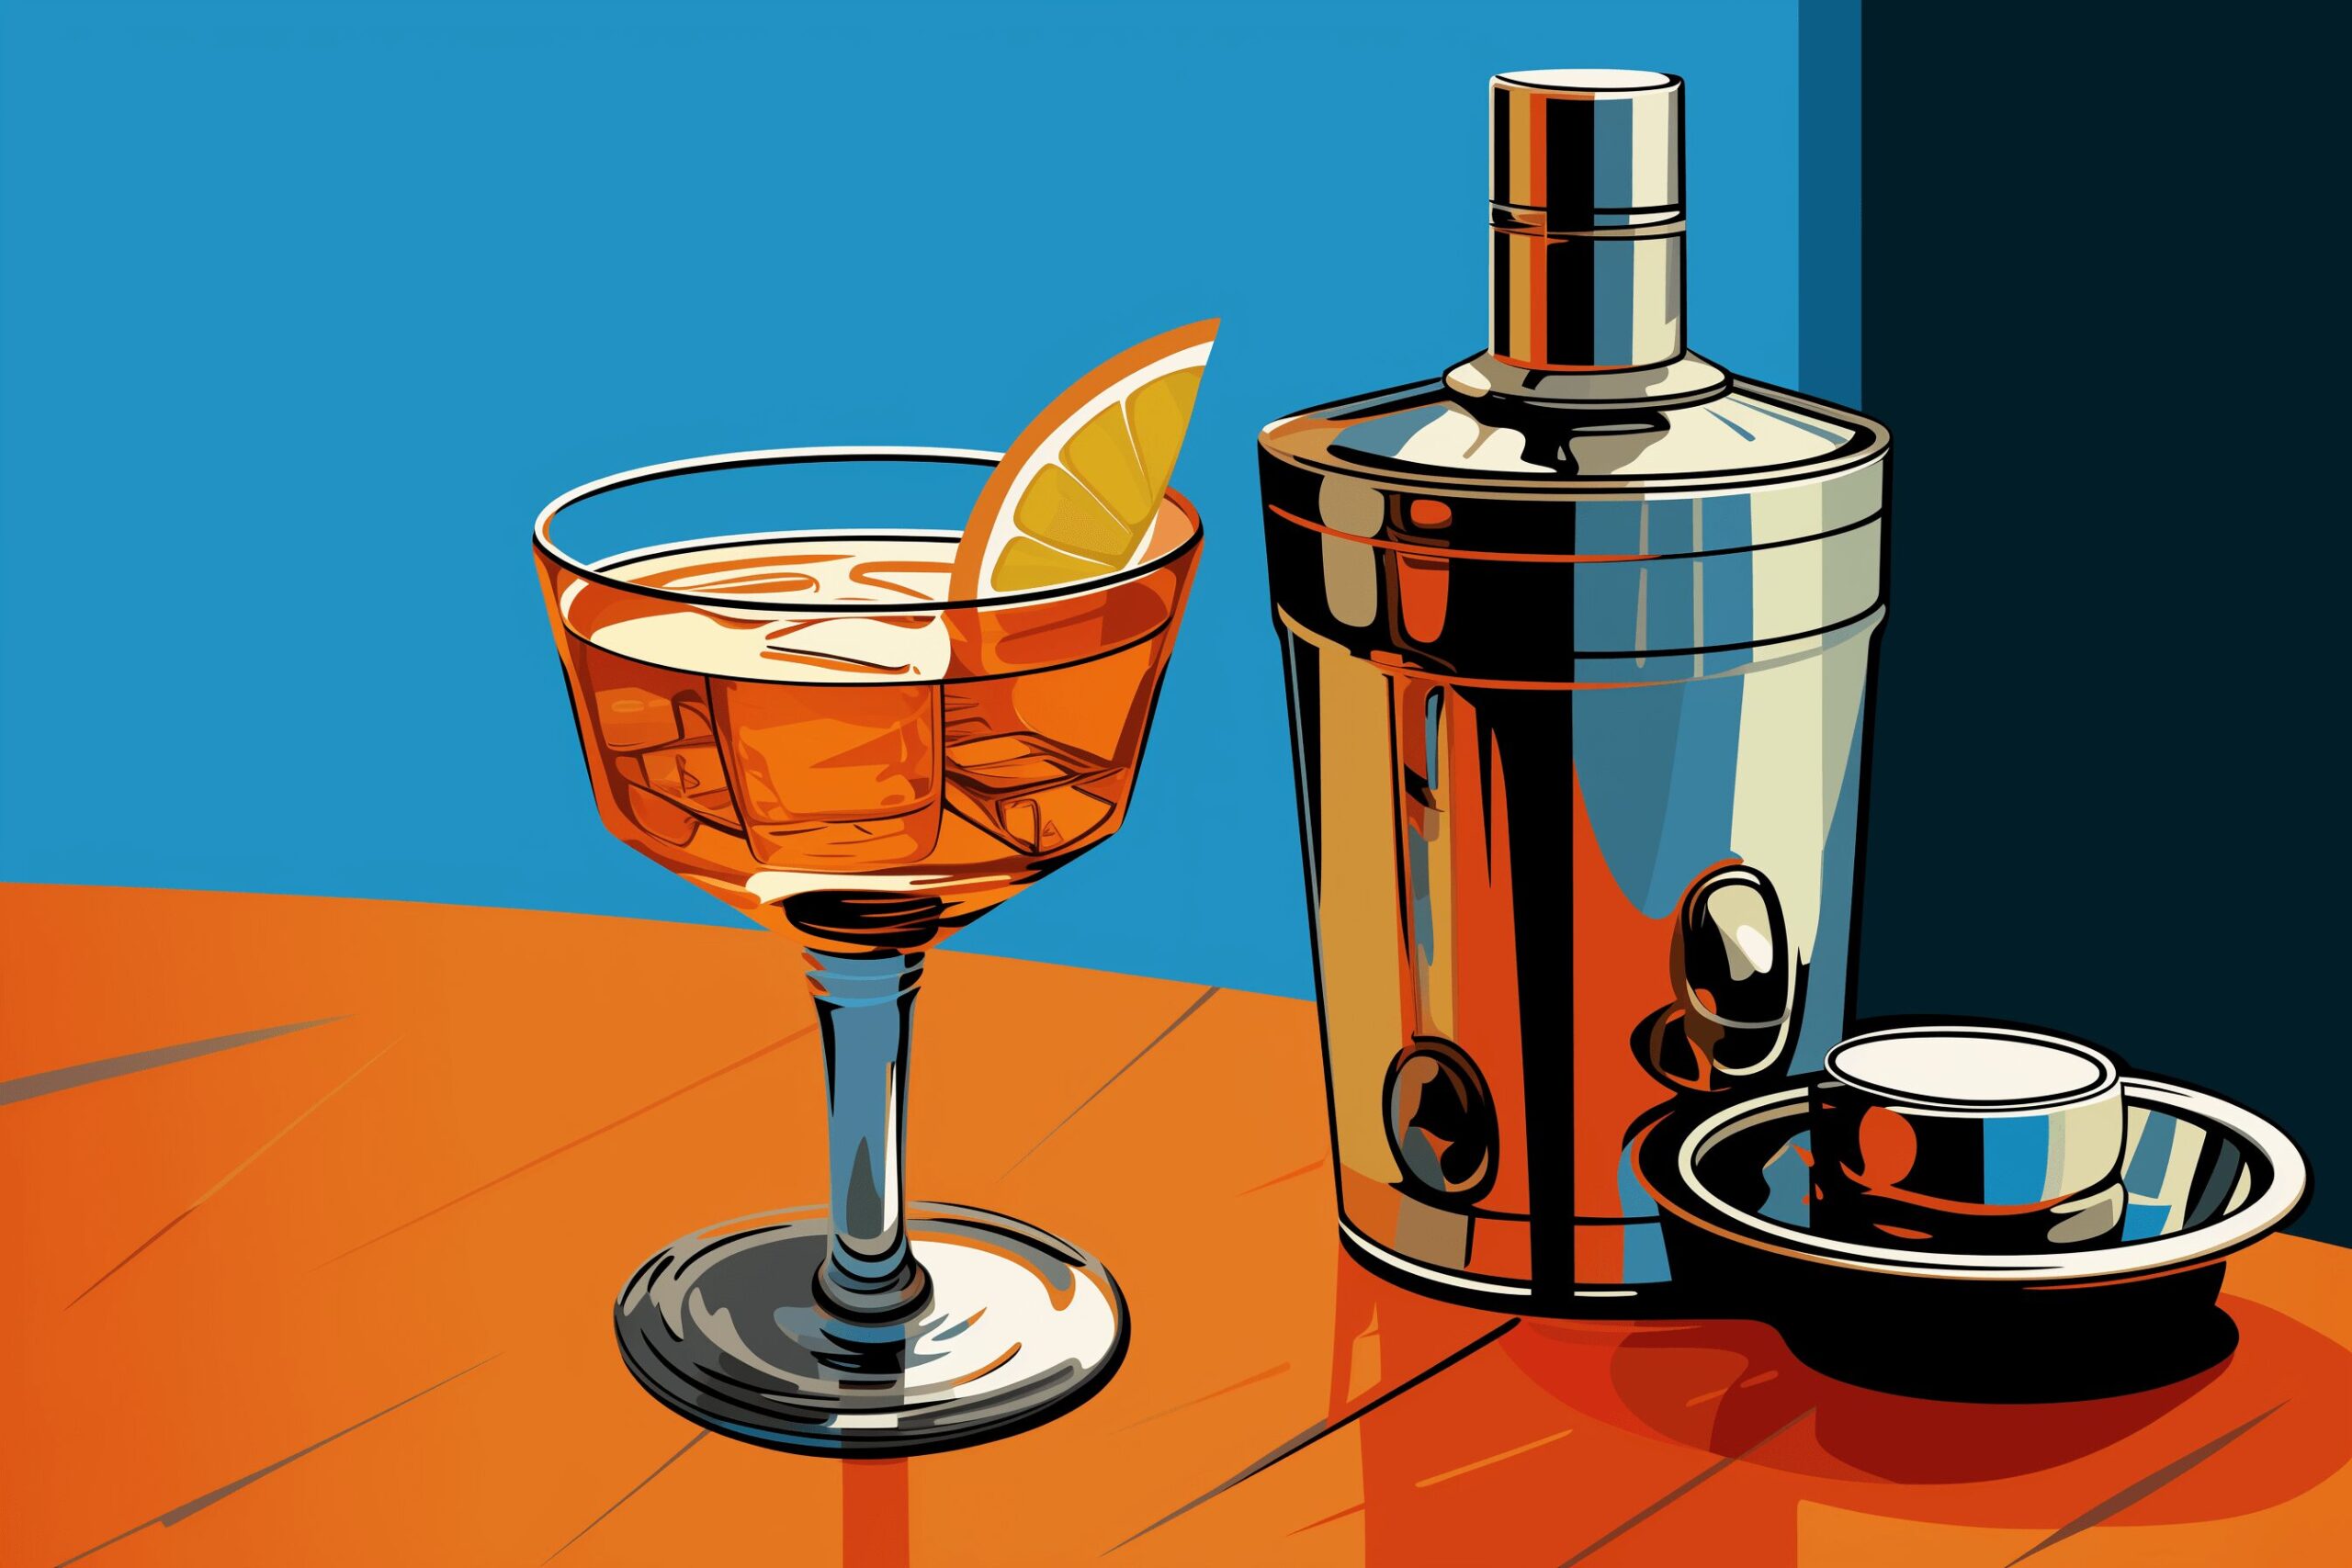 A cocktail and shaker